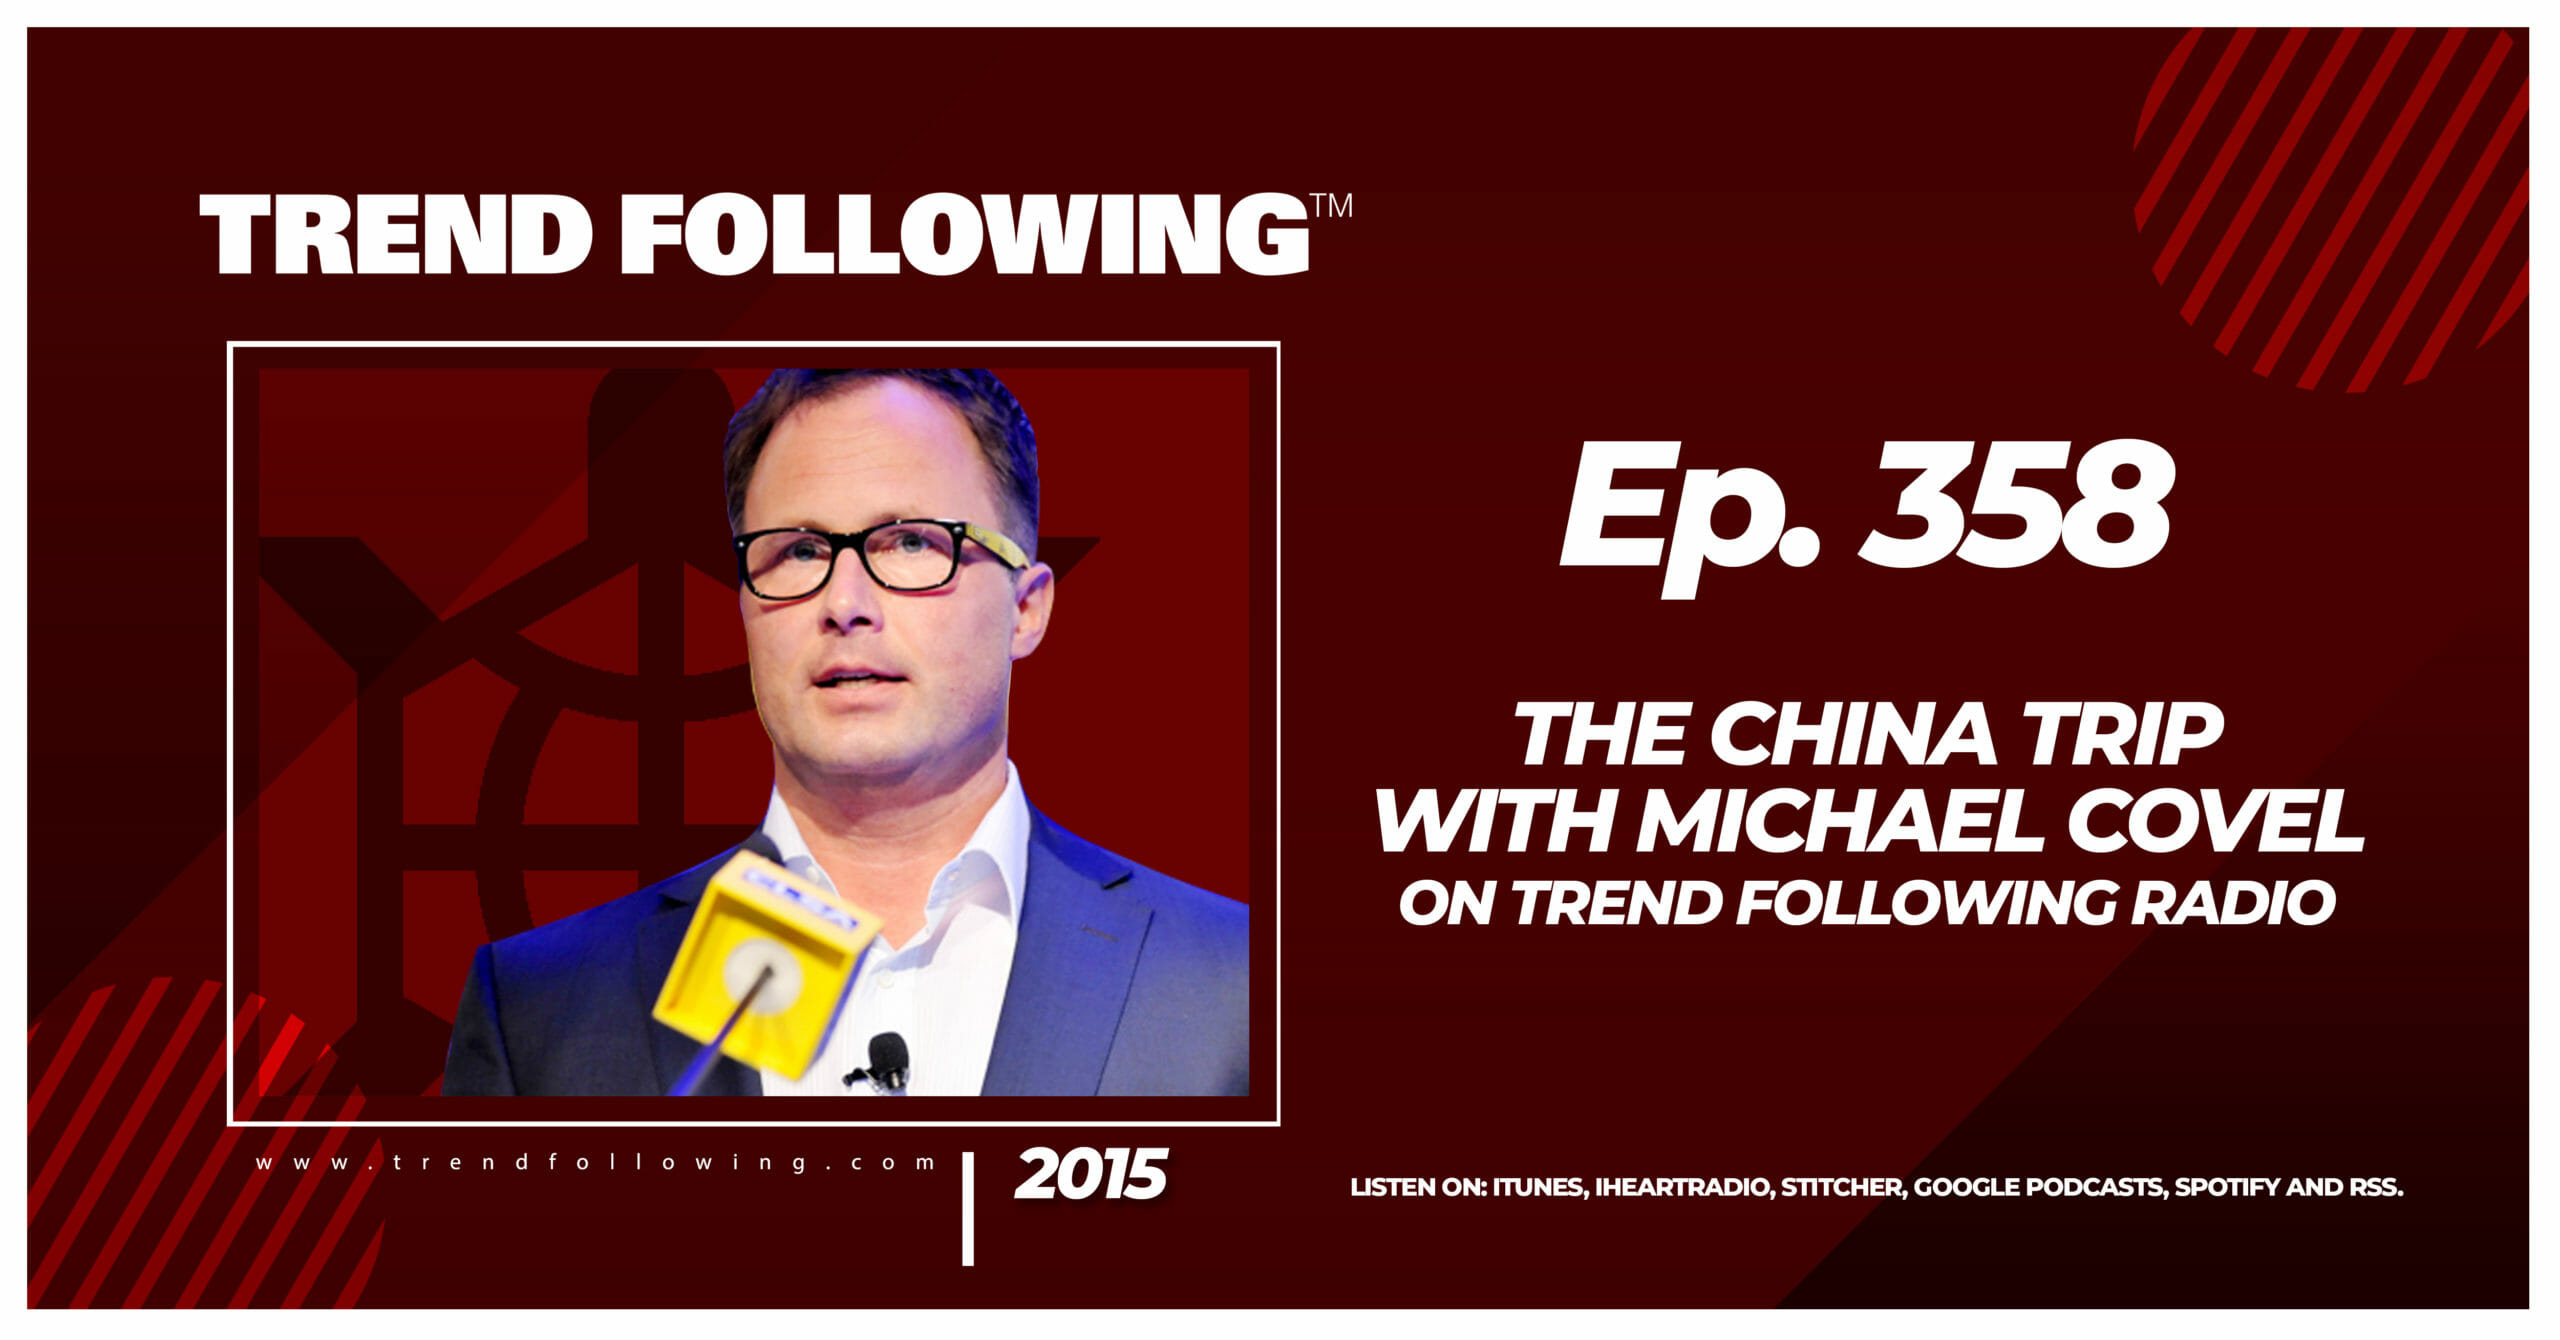 The China Trip with Michael Covel on Trend Following Radio